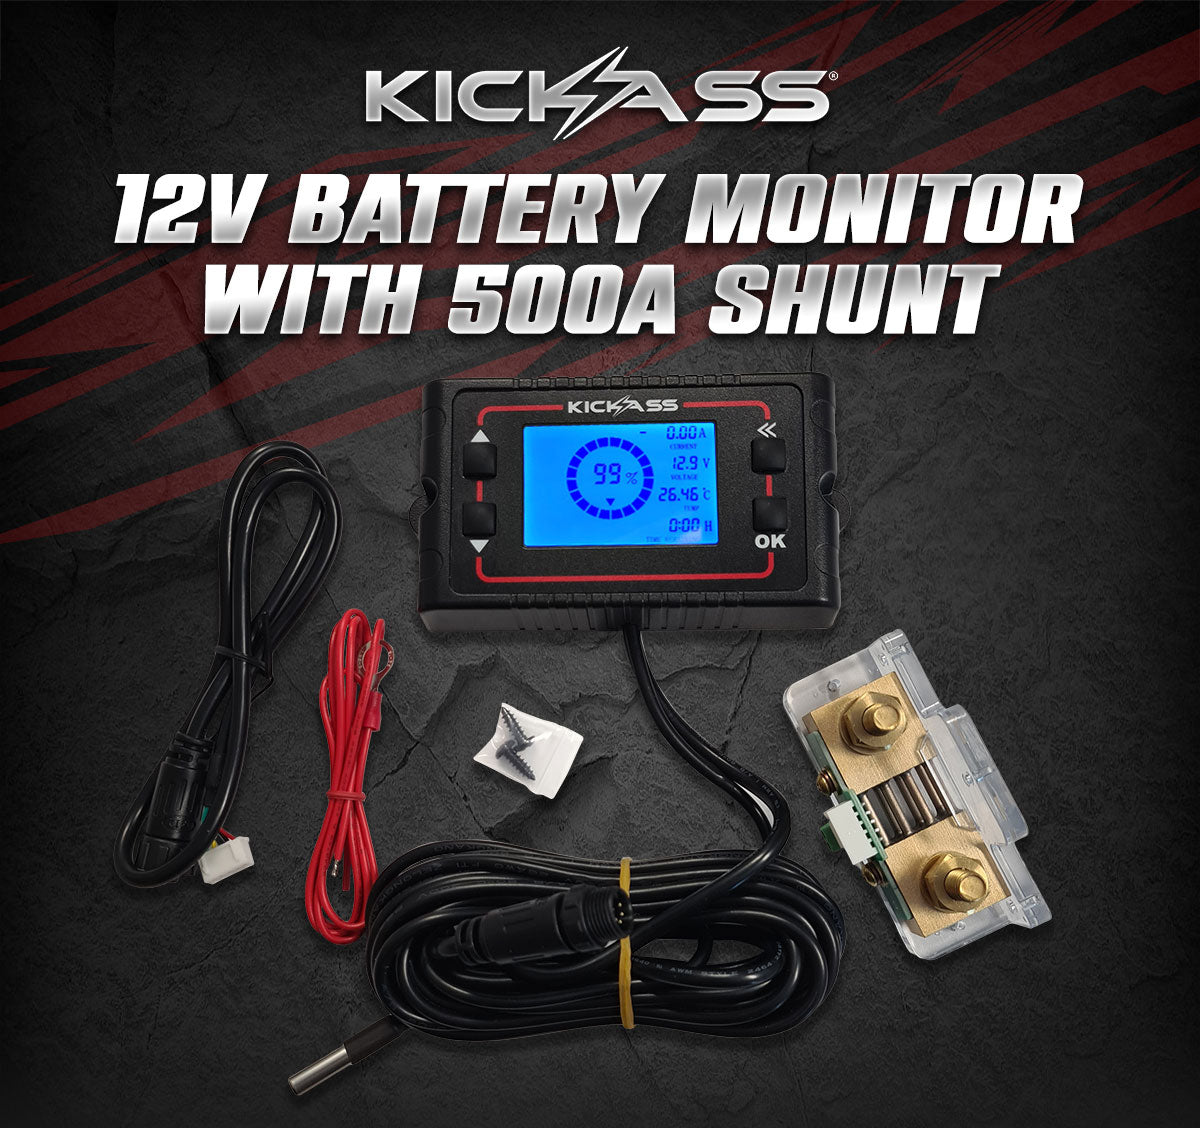 500A Battery Monitoring Shunt with Remote Display